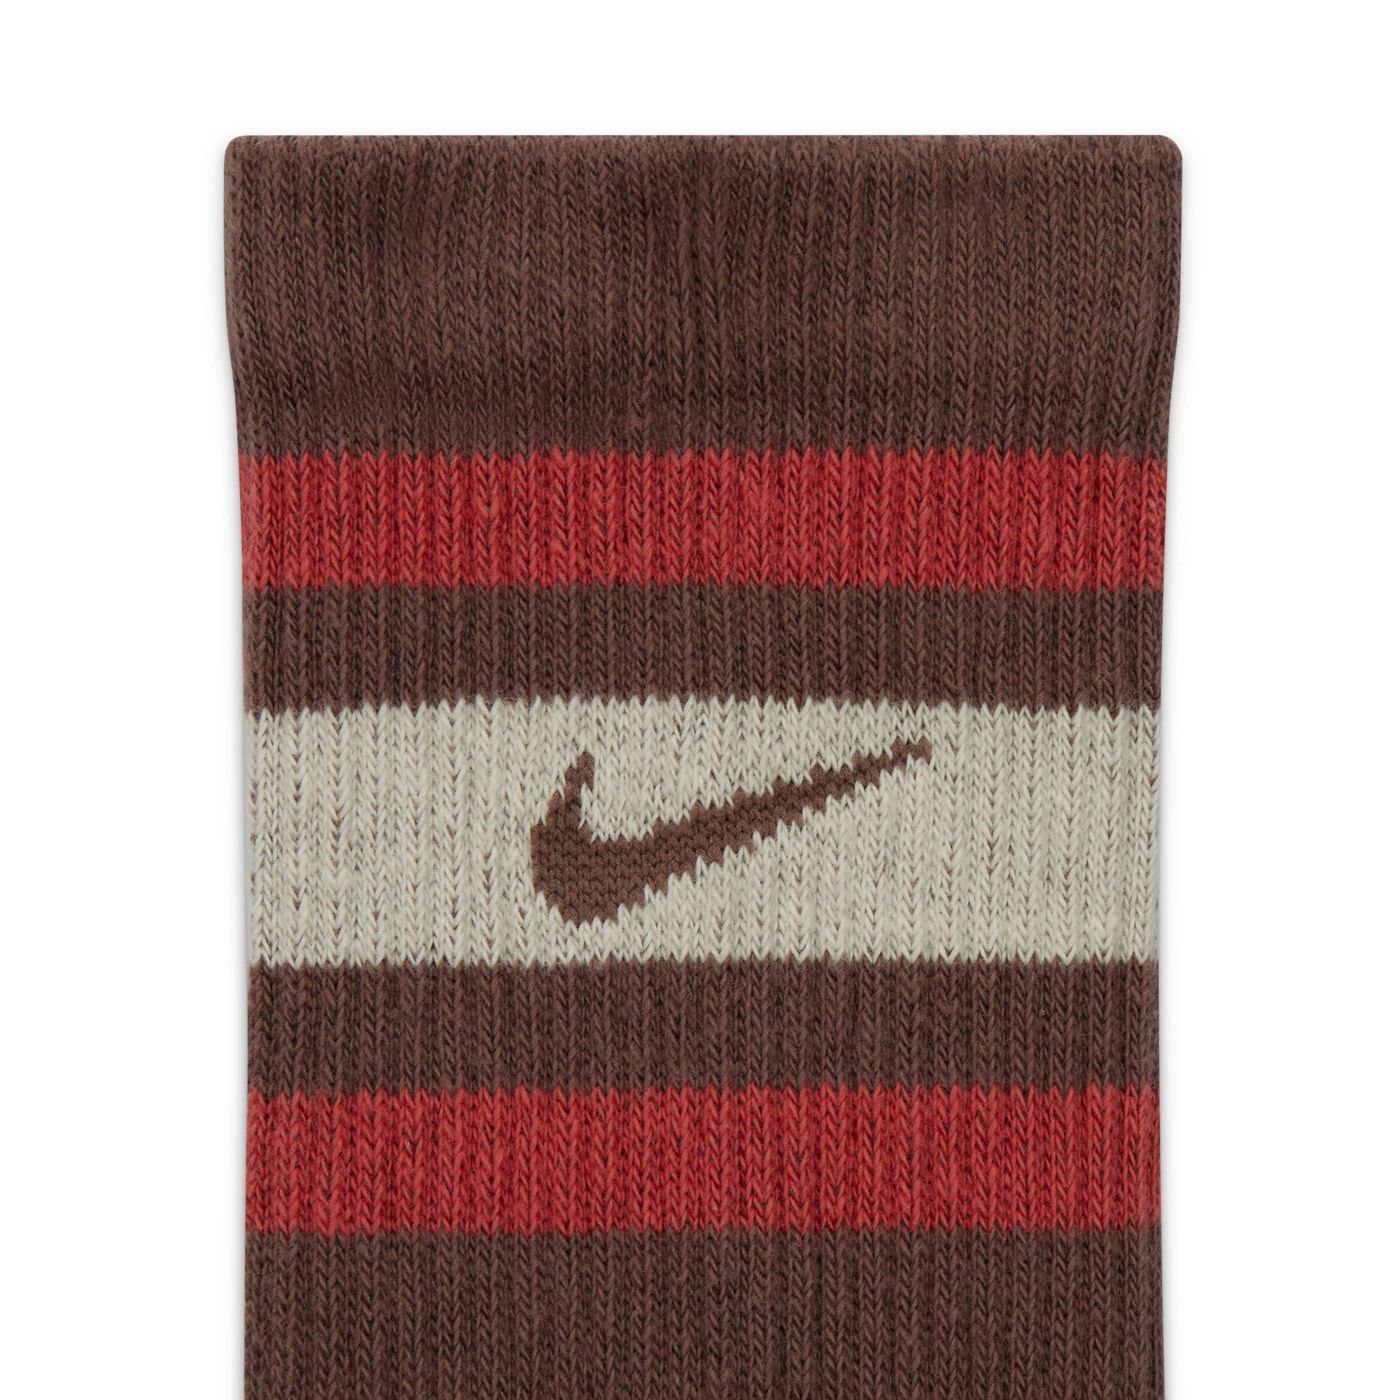 Nike Training Everyday Plus 3 pack socks in plum, ivory and red